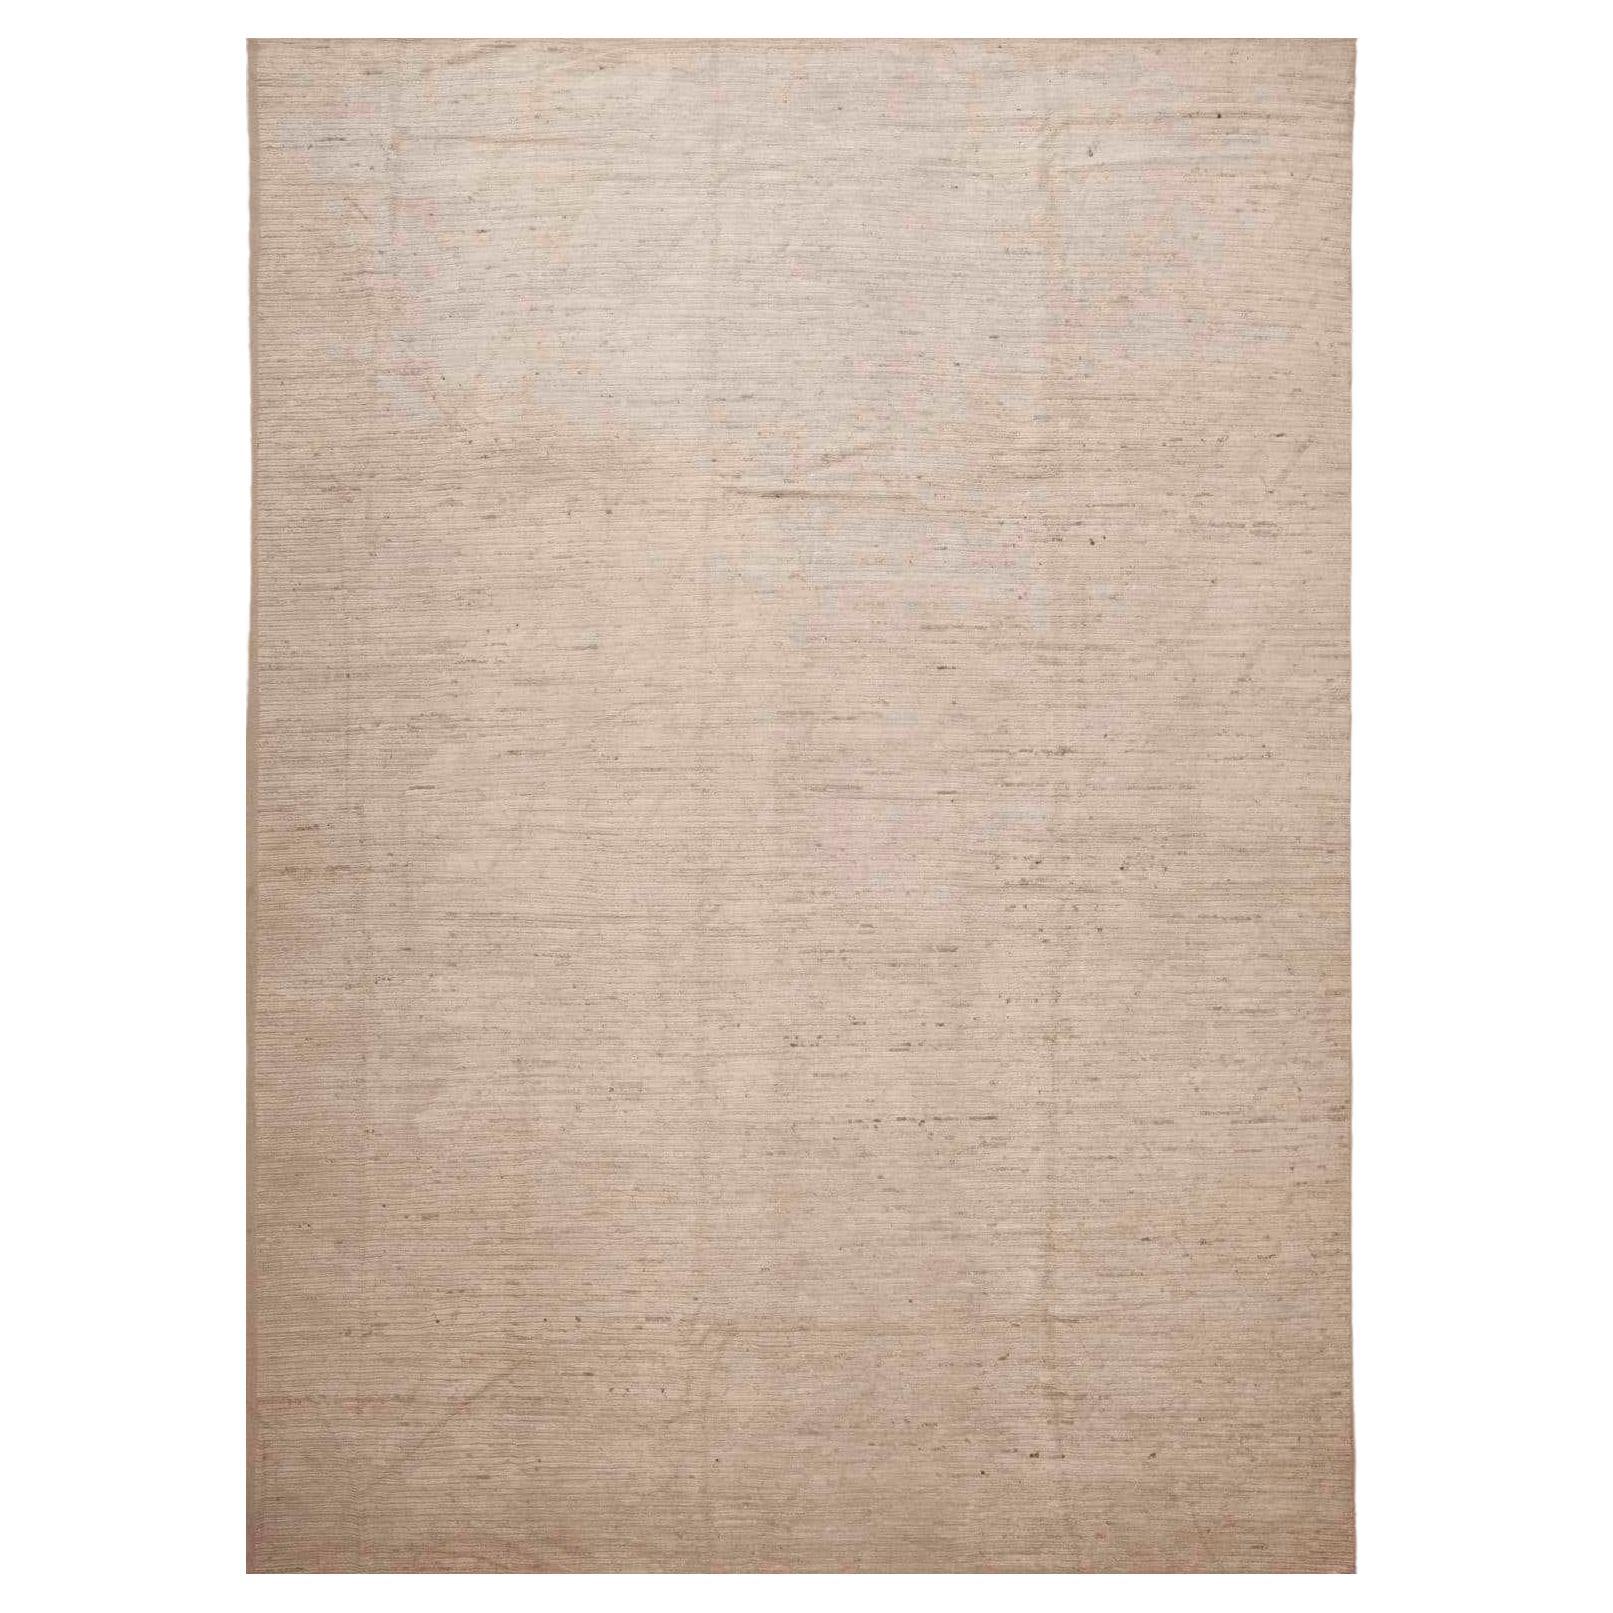 Nazmiyal Collection Ivory Cream Minimalist Abstract Modern Area Rug 10' x 12'10" For Sale